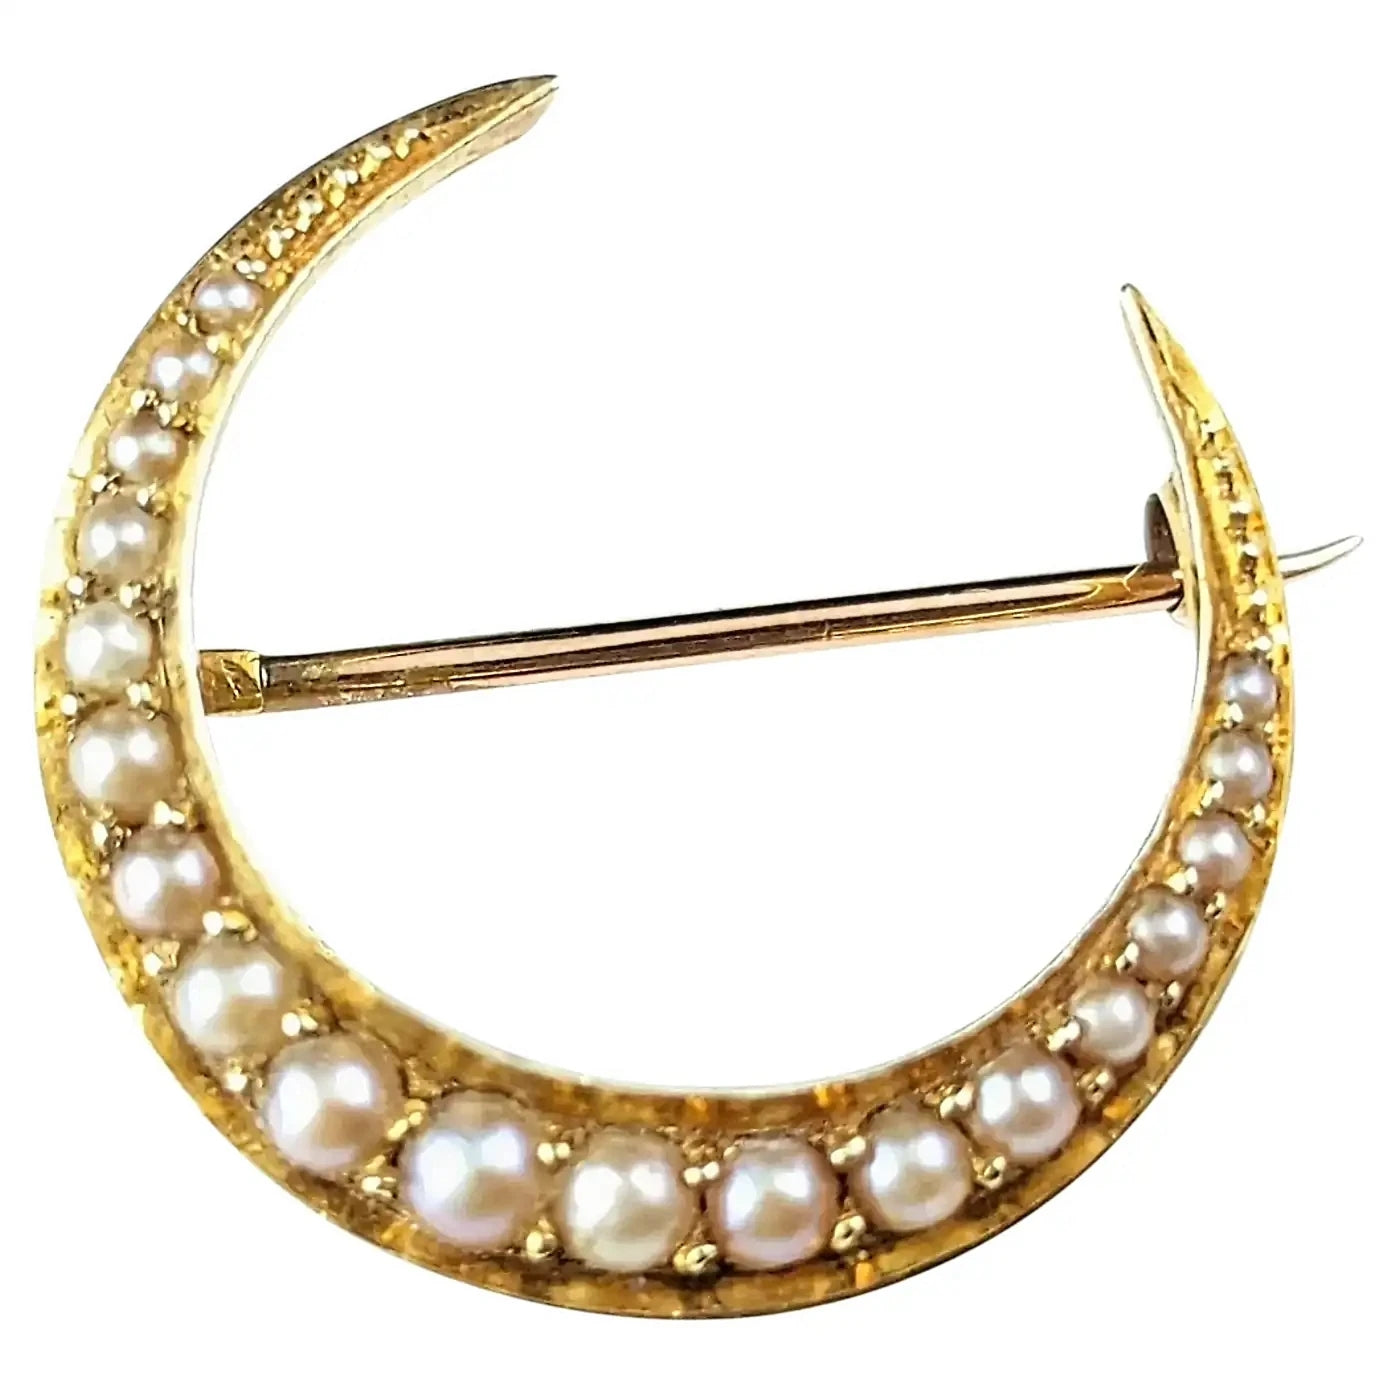 Antique 15ct gold Pearl Crescent moon brooch, Victorian